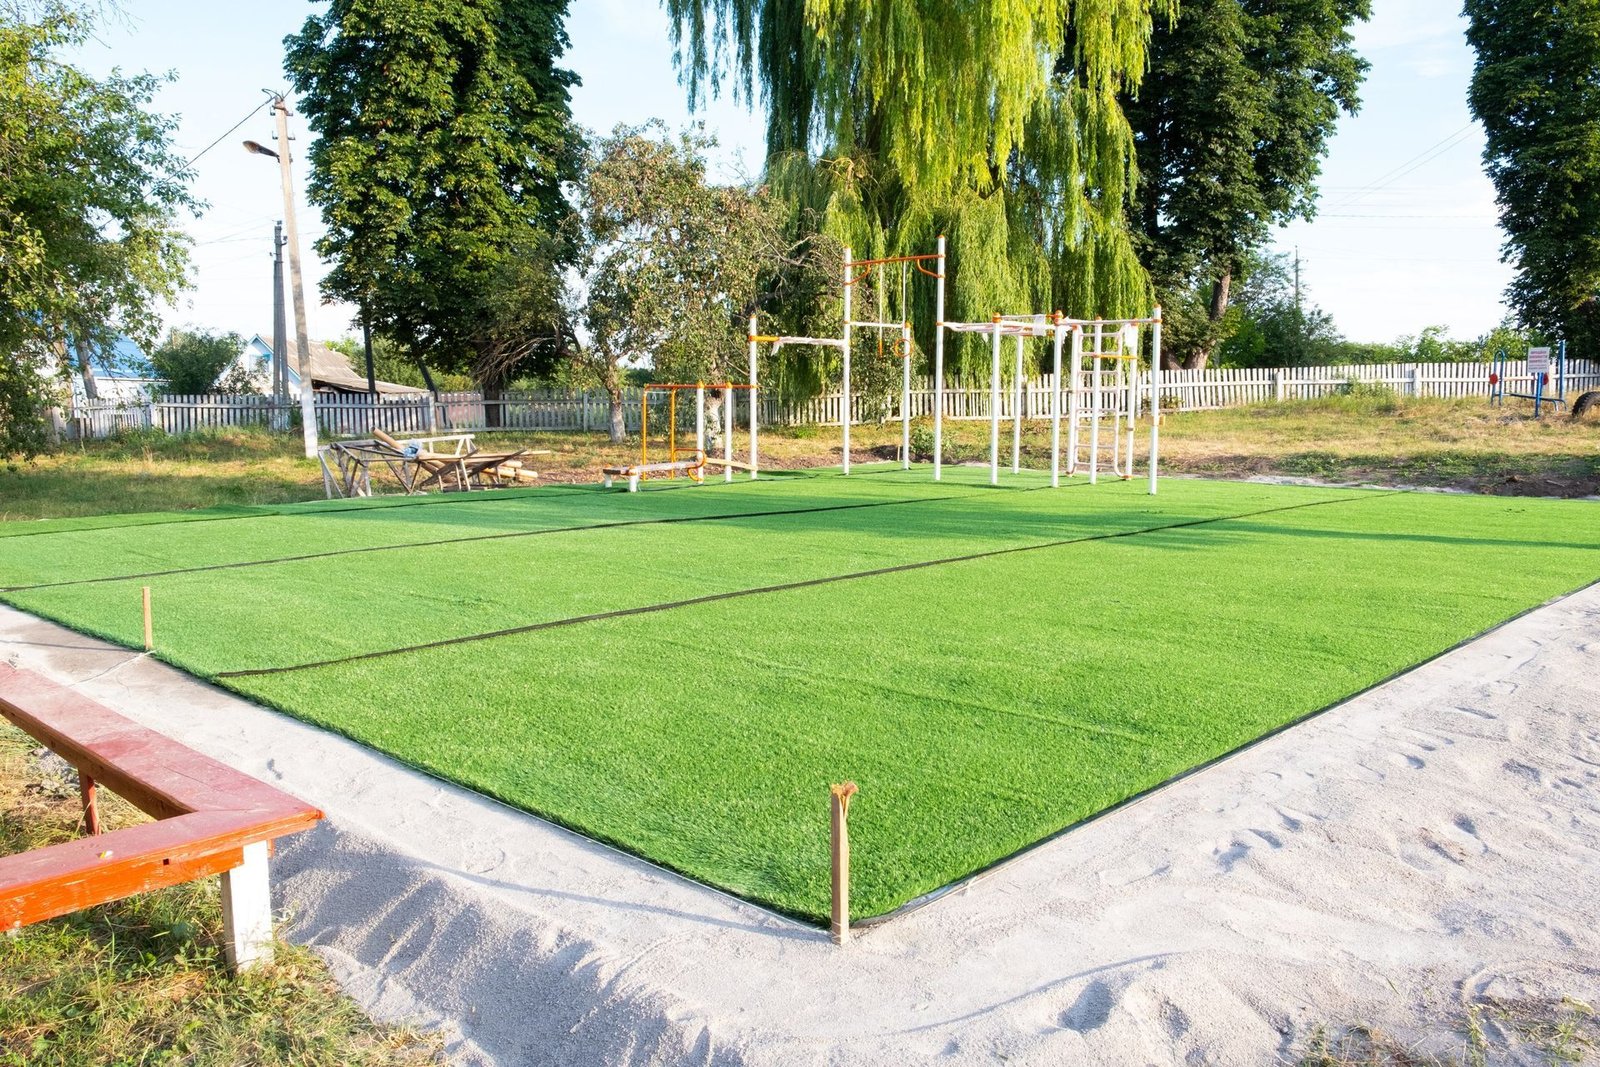 A sports field with artificial grass, expertly laid by dedicated turf installers, surrounded by a sandy border. Situated in a park with trees and a white picket fence in the background, this inviting outdoor space boasts outdoor fitness equipment, picnic tables nearby, and a red bench in the foreground.